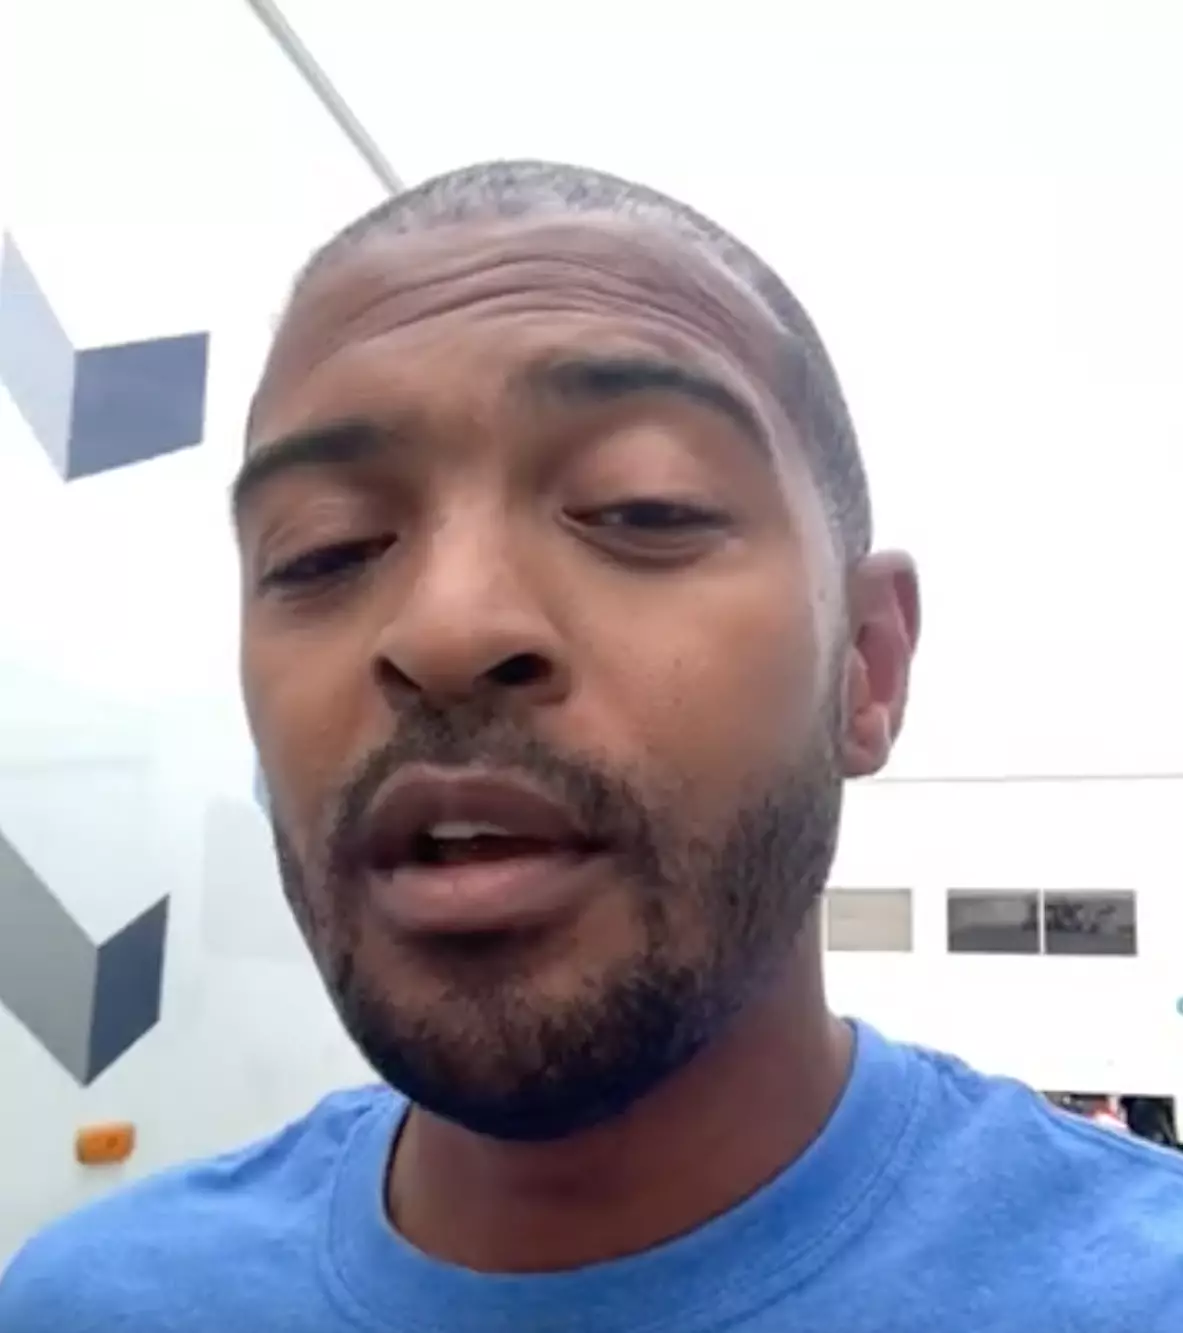 Noel Clarke as seen in the introduction video on Cameo (